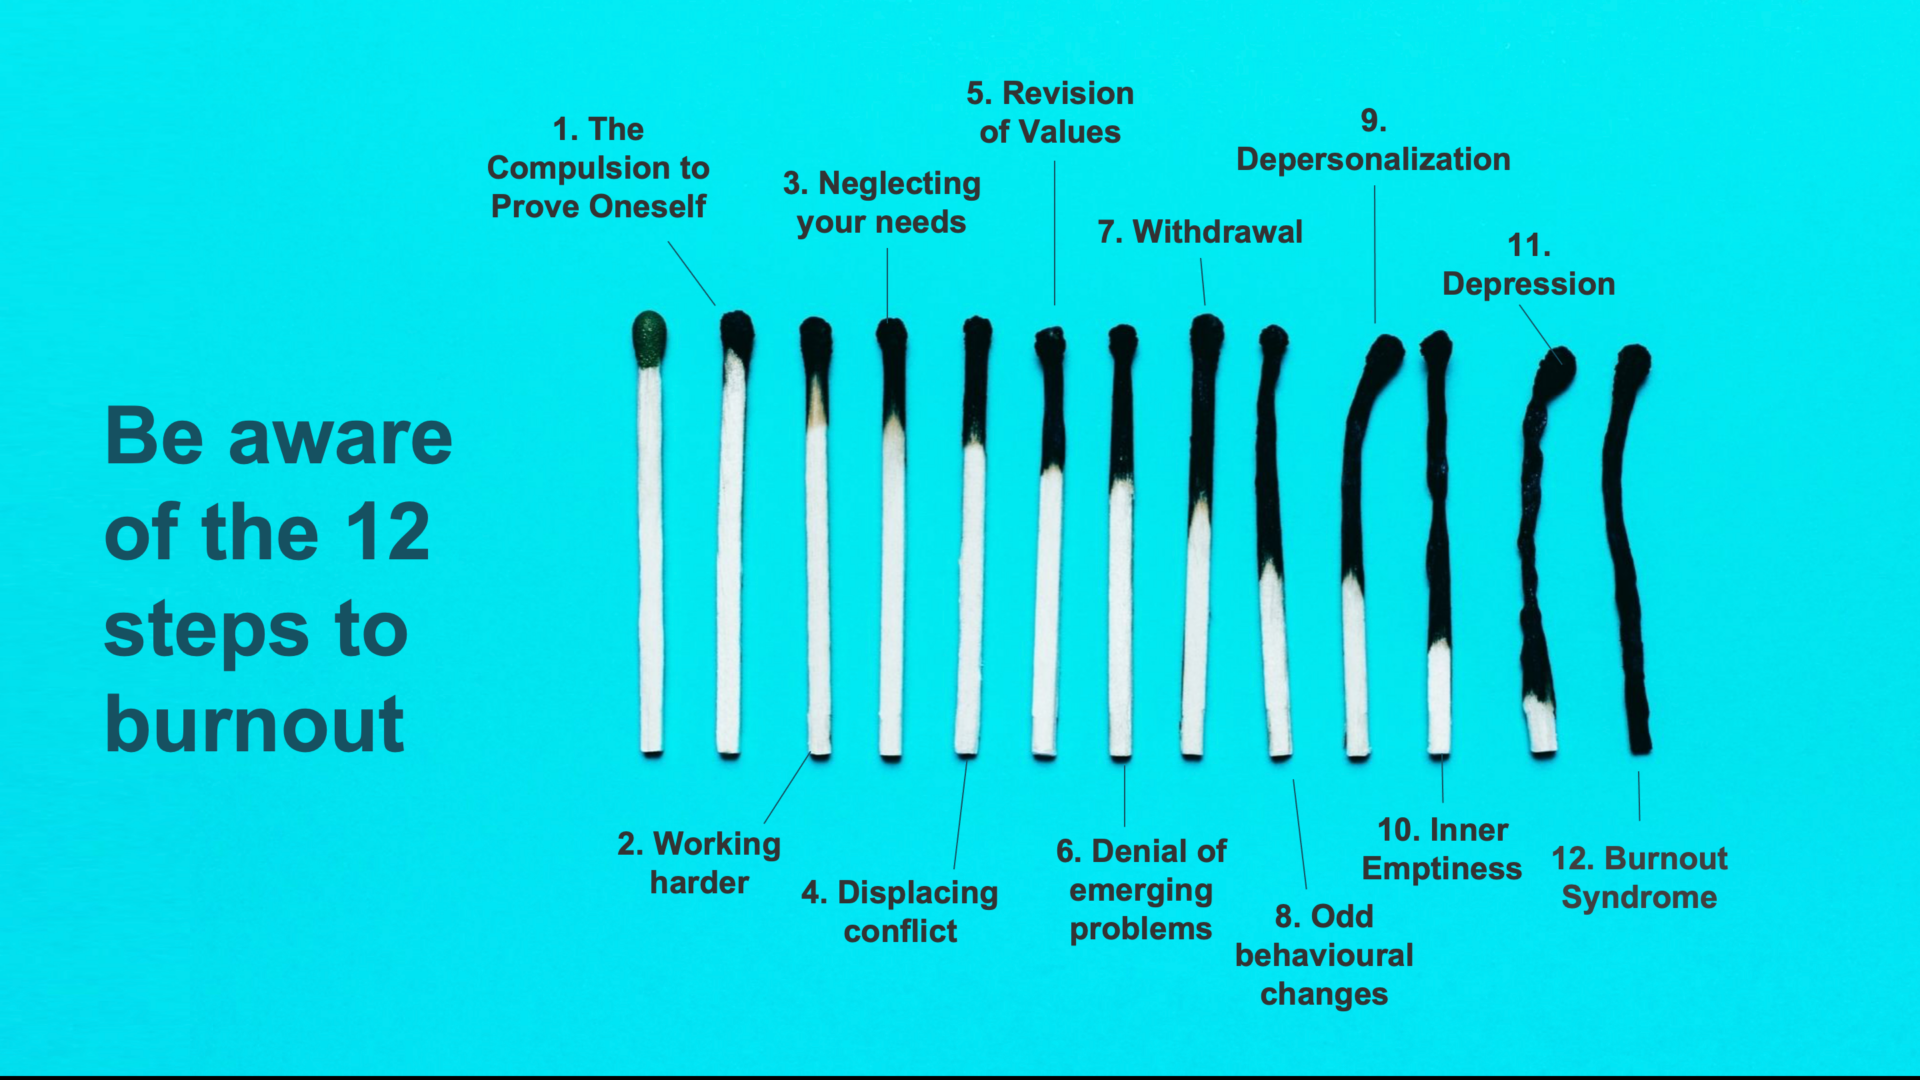 An image detailing the 12 stages of burnout